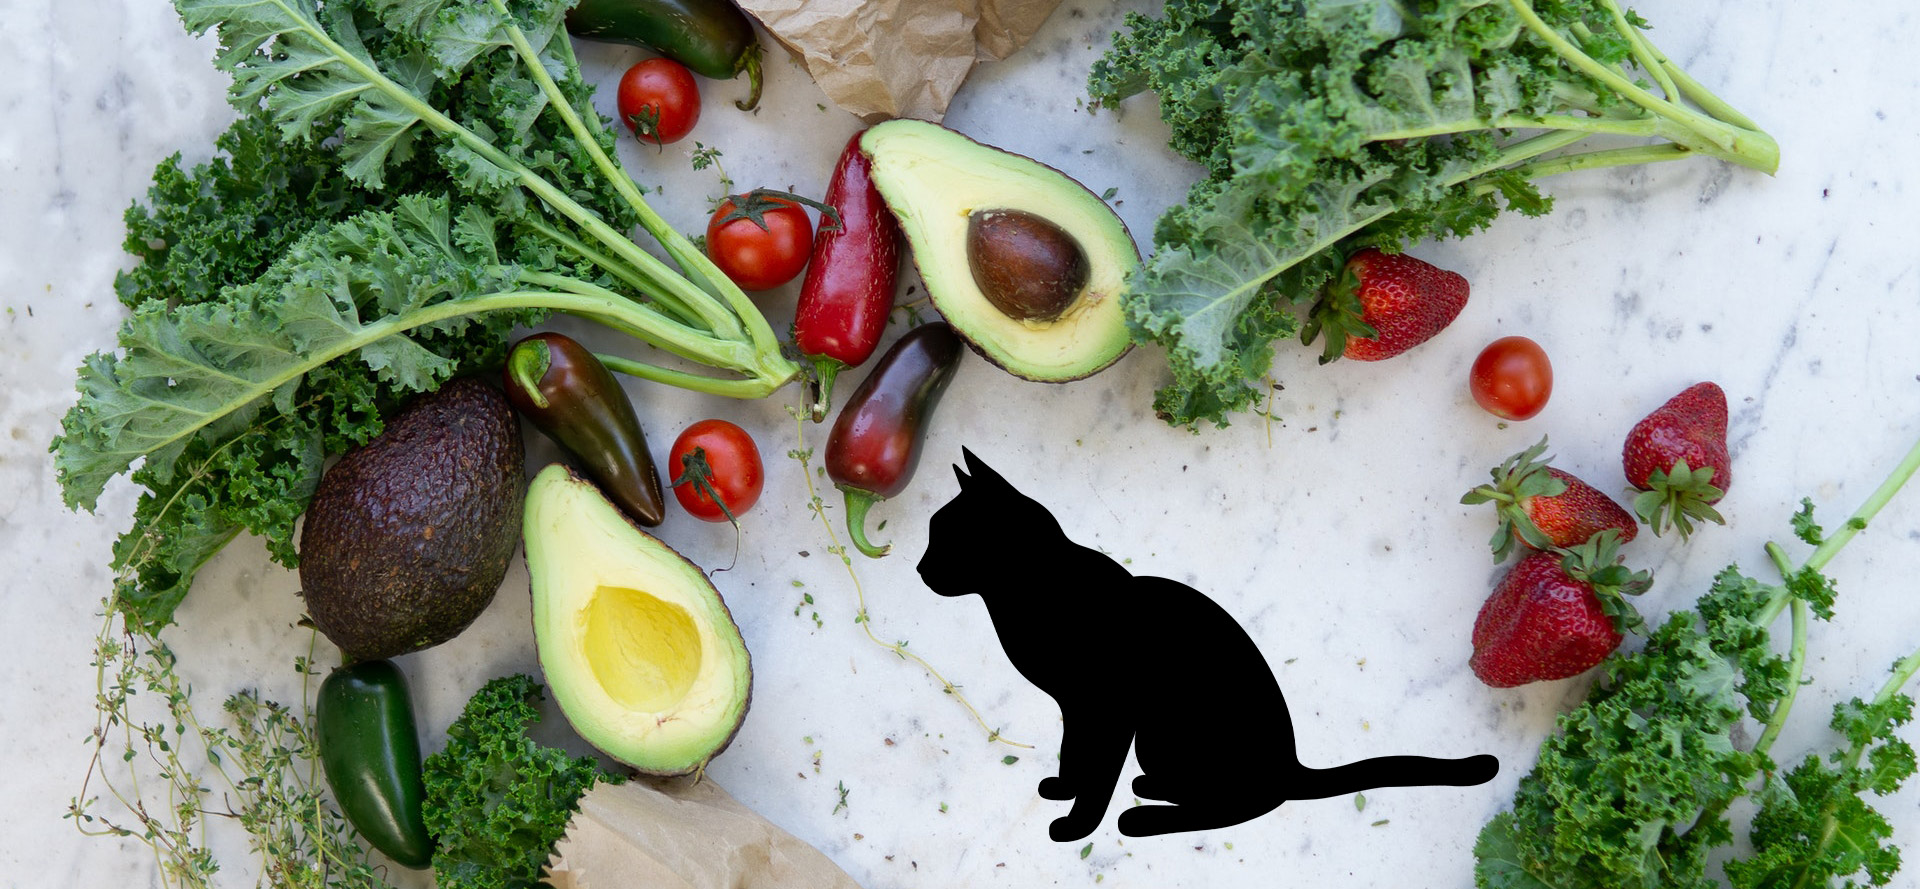 Cat and vegetables.